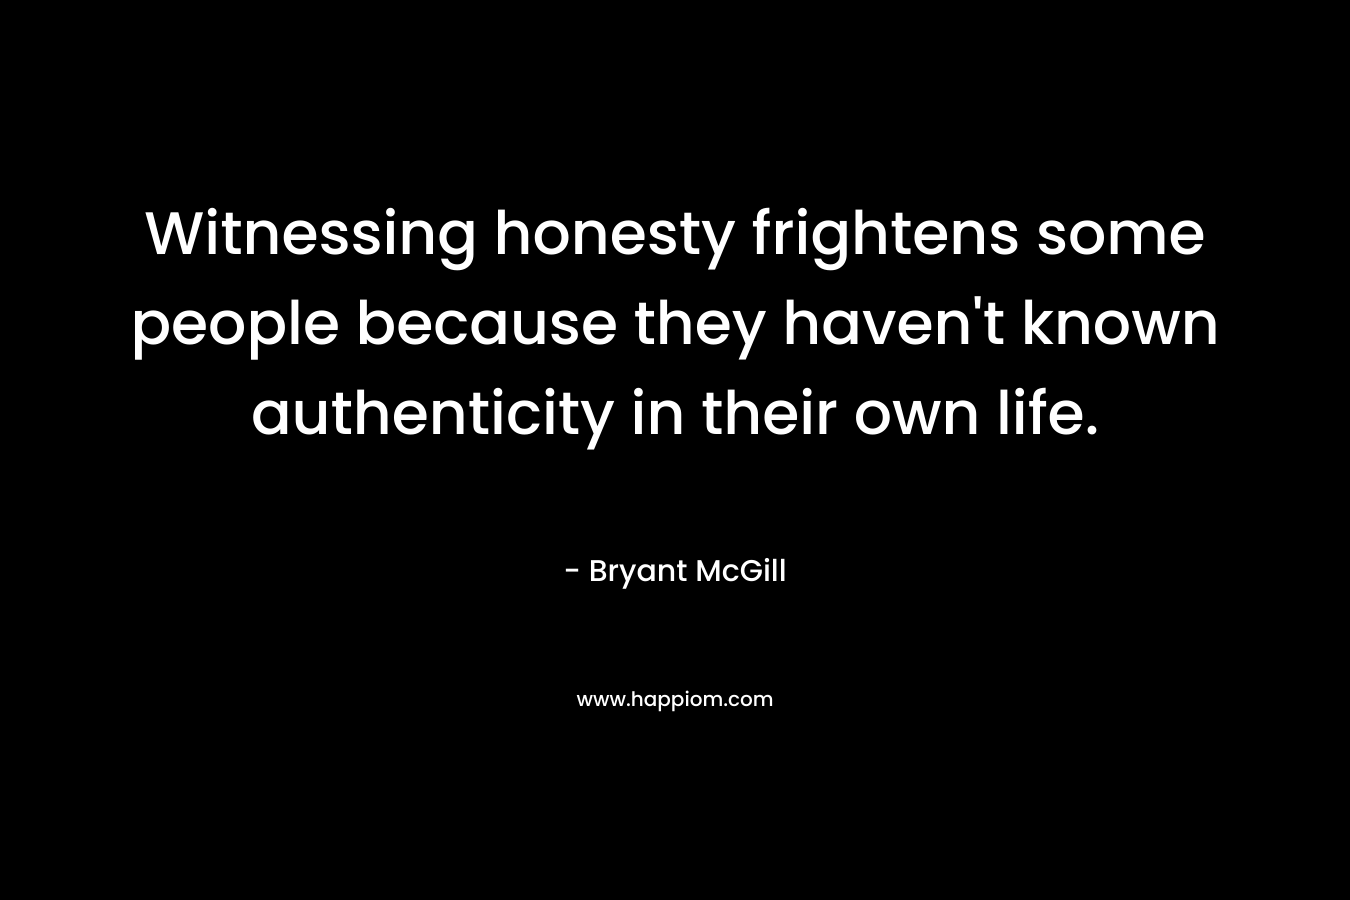 Witnessing honesty frightens some people because they haven’t known authenticity in their own life. – Bryant McGill